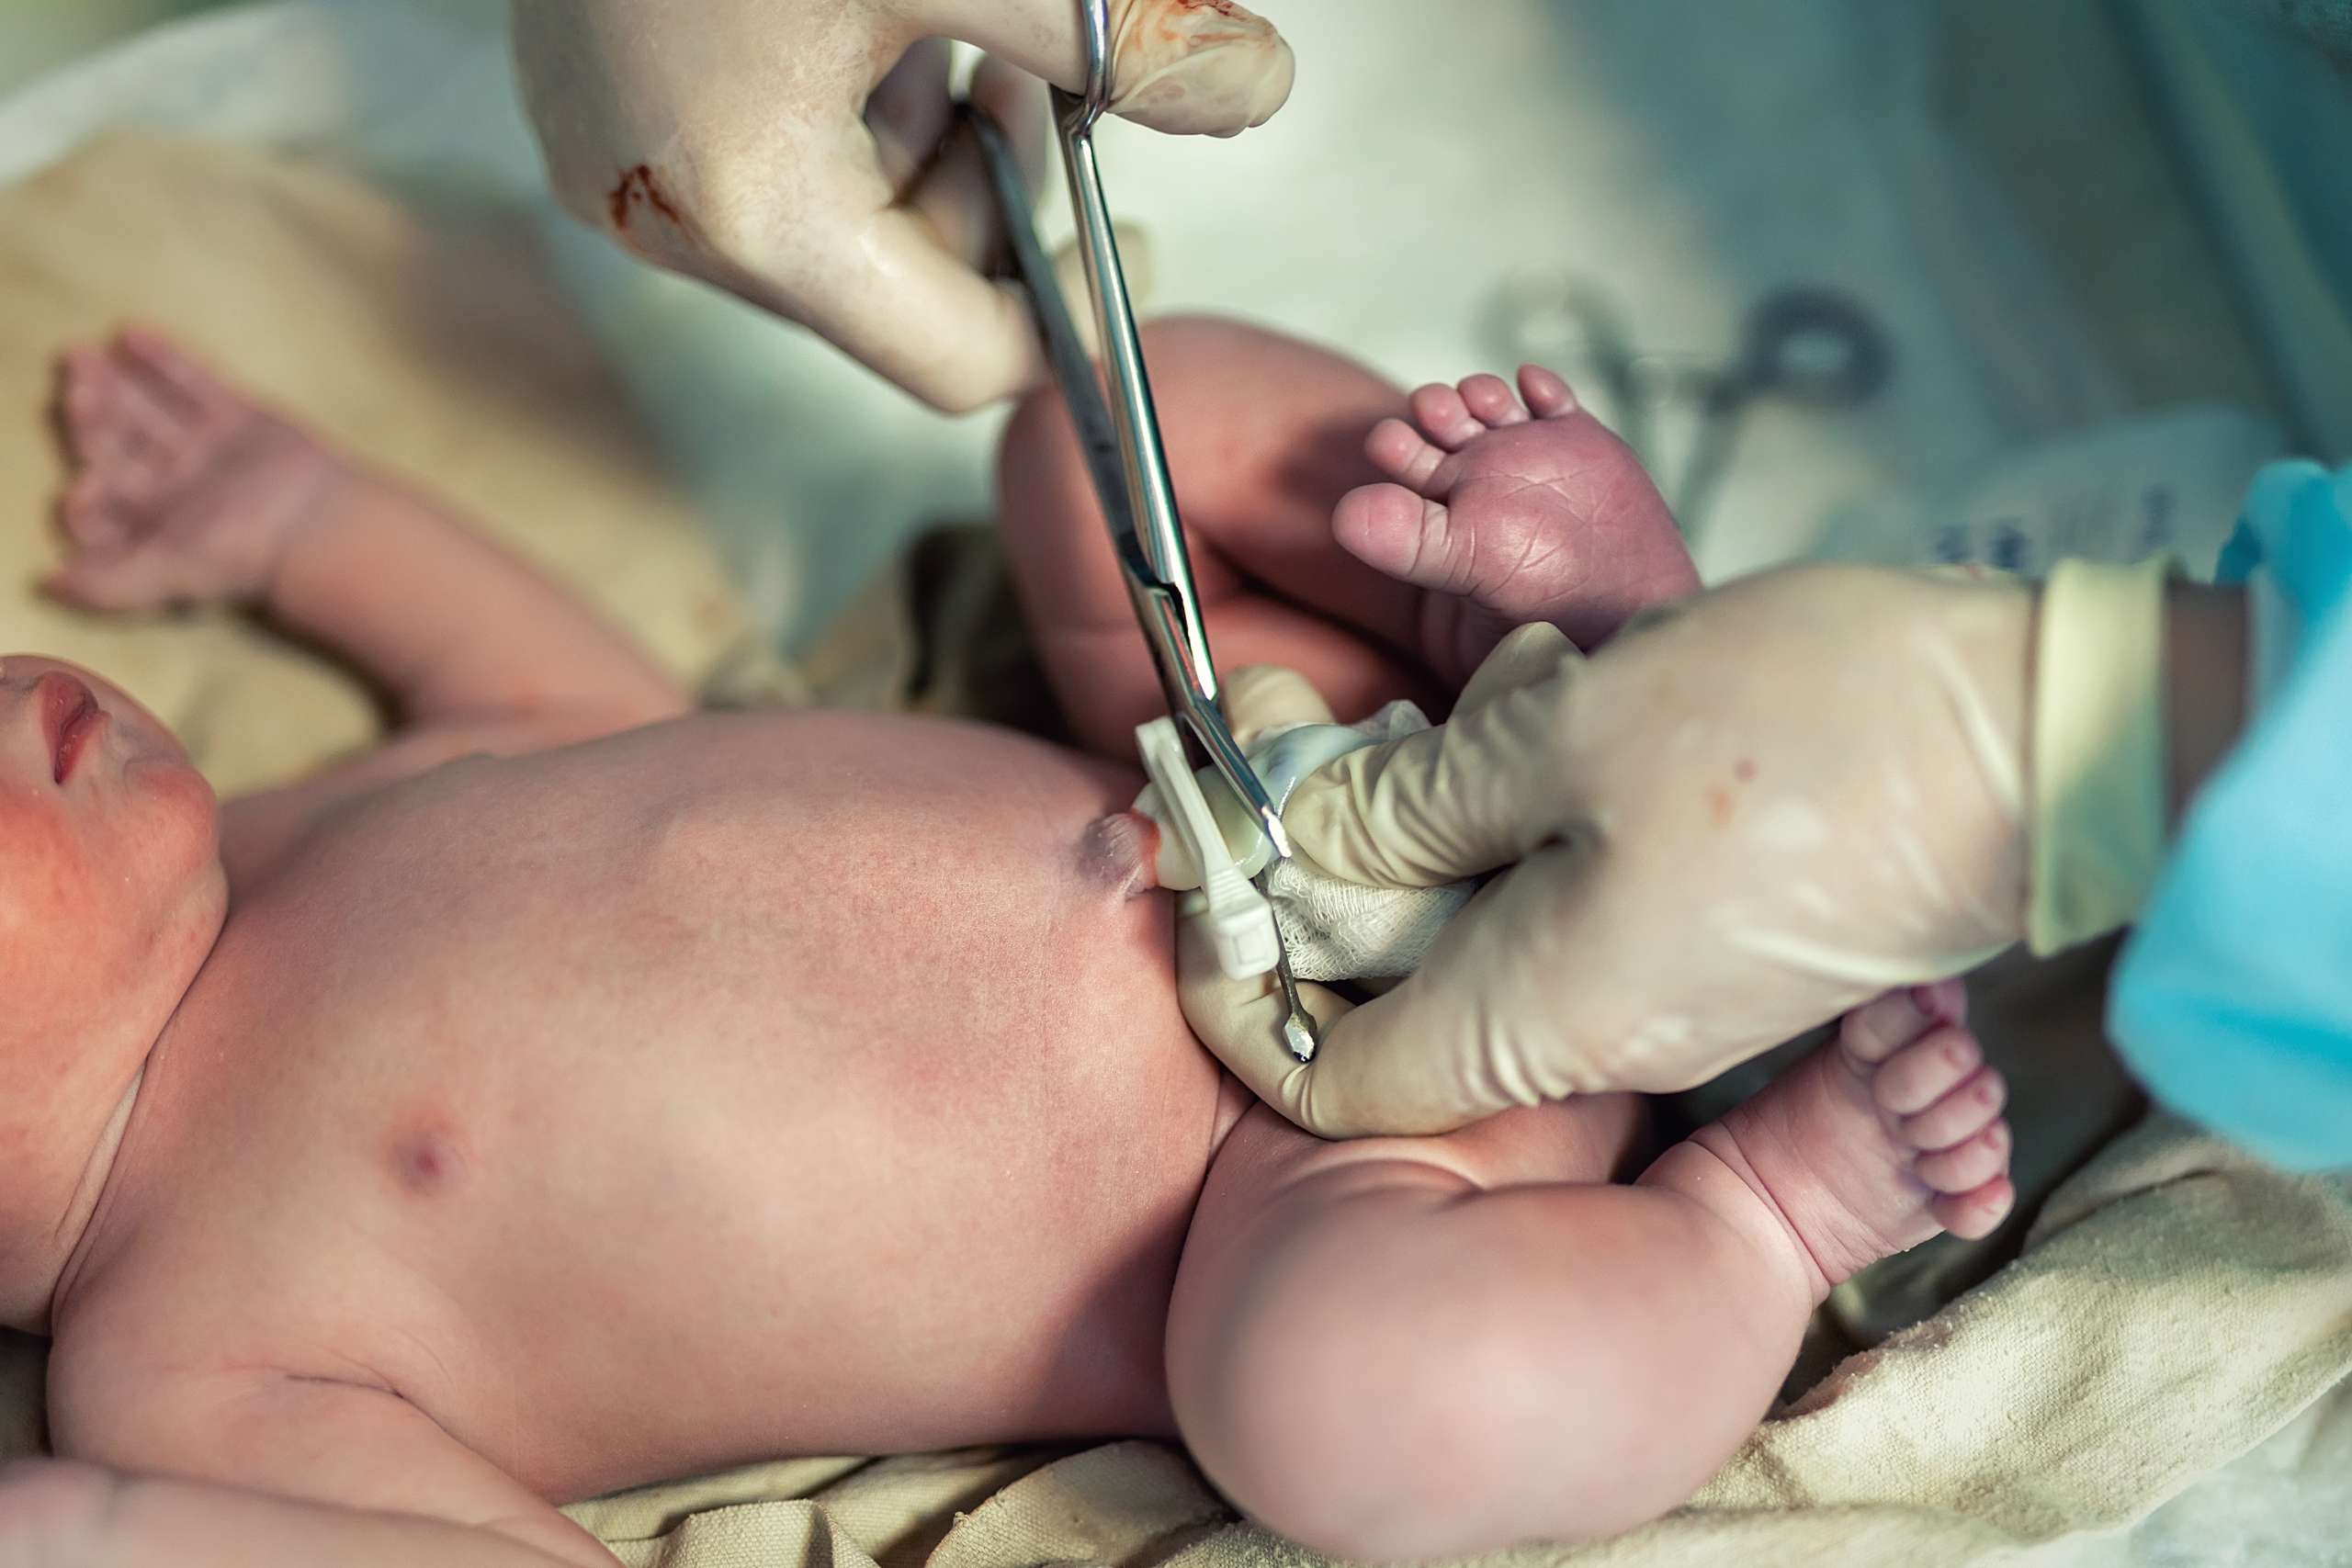 Close-up doctor obstetrician nurse cutting umbilical cord with medical scissors to newborn infant baby.